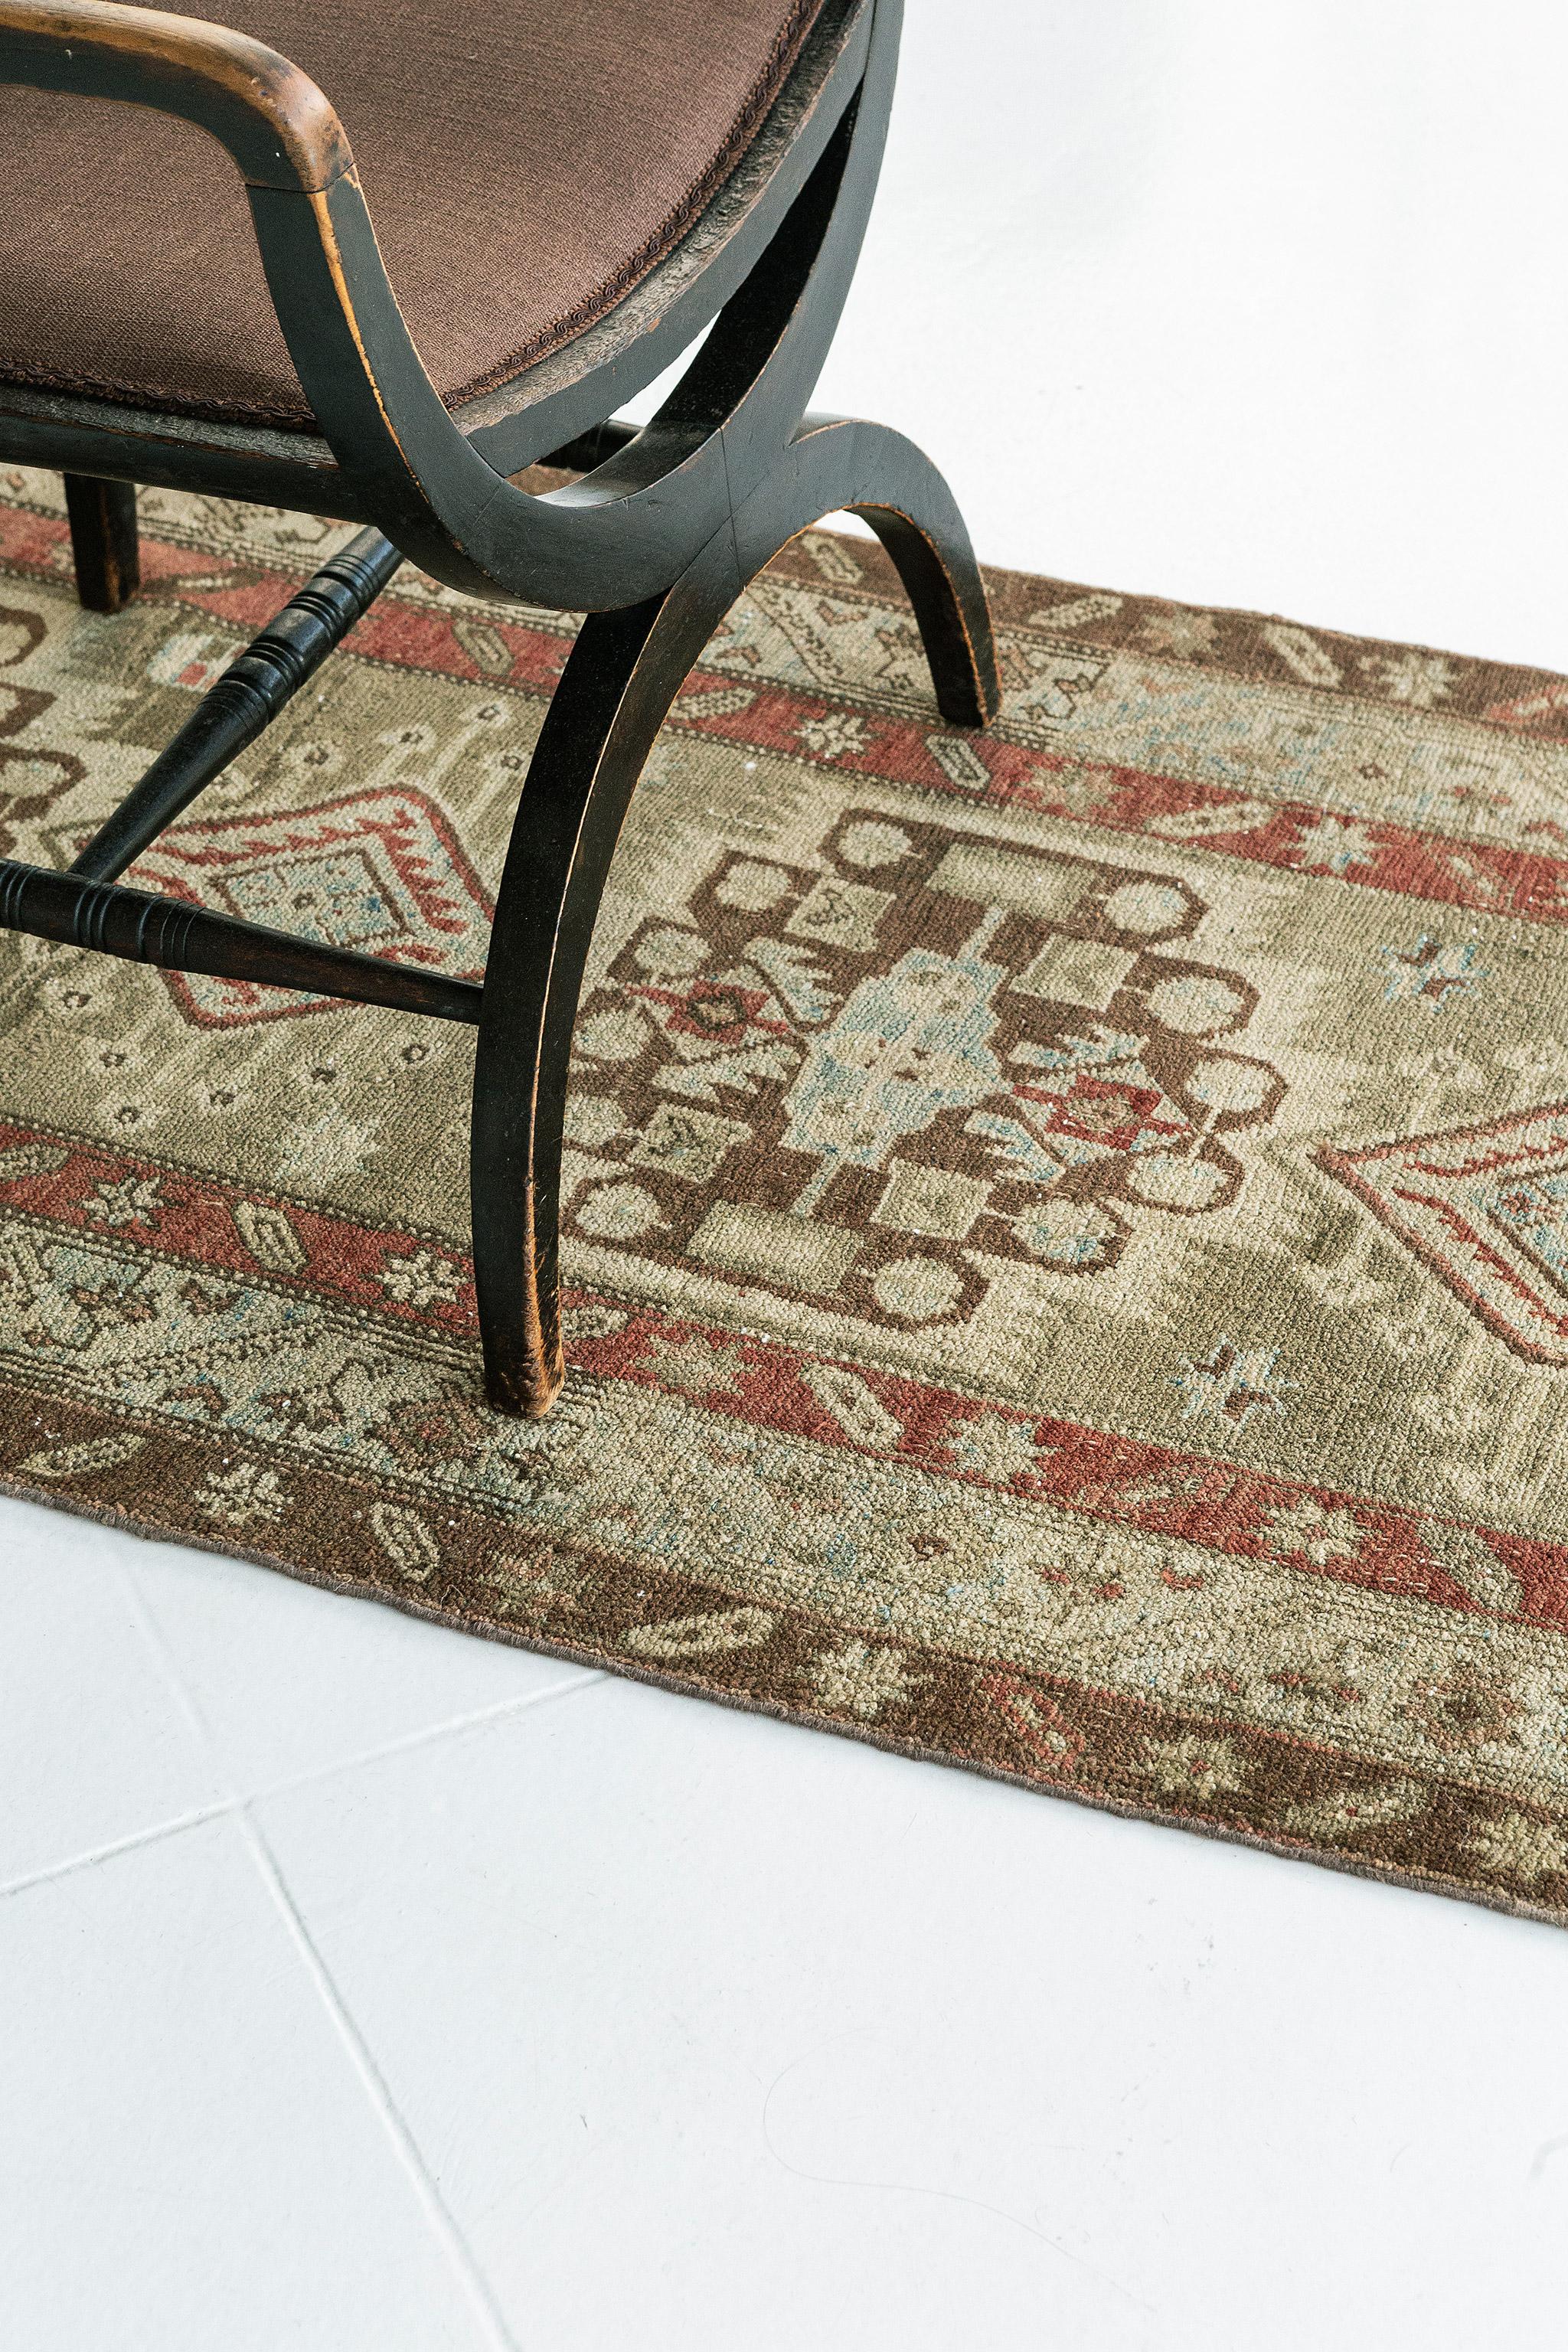 This gorgeous Persian Sarab carpet features strong geometric lines and squares and a tribal pattern that would appeal to any traditionalist. Charming brown, blushing, and soft blue colors accentuate its beauty. This color scheme is perfect for a